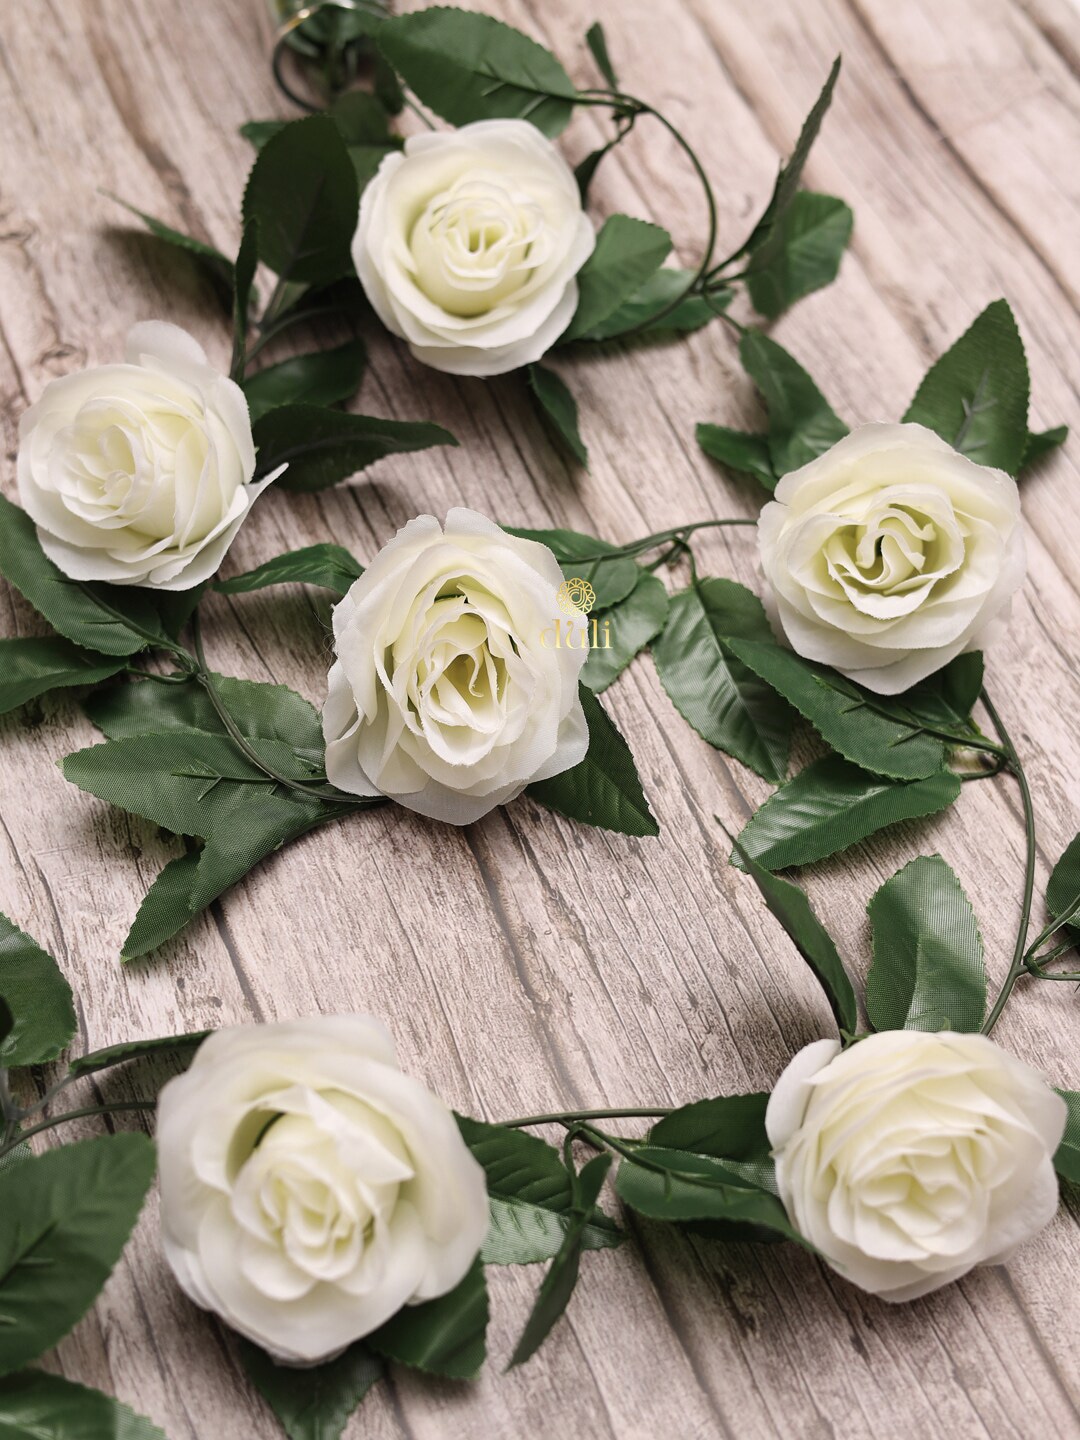 DULI White & Green Rose Artificial Flowers Decorative Vines Price in India